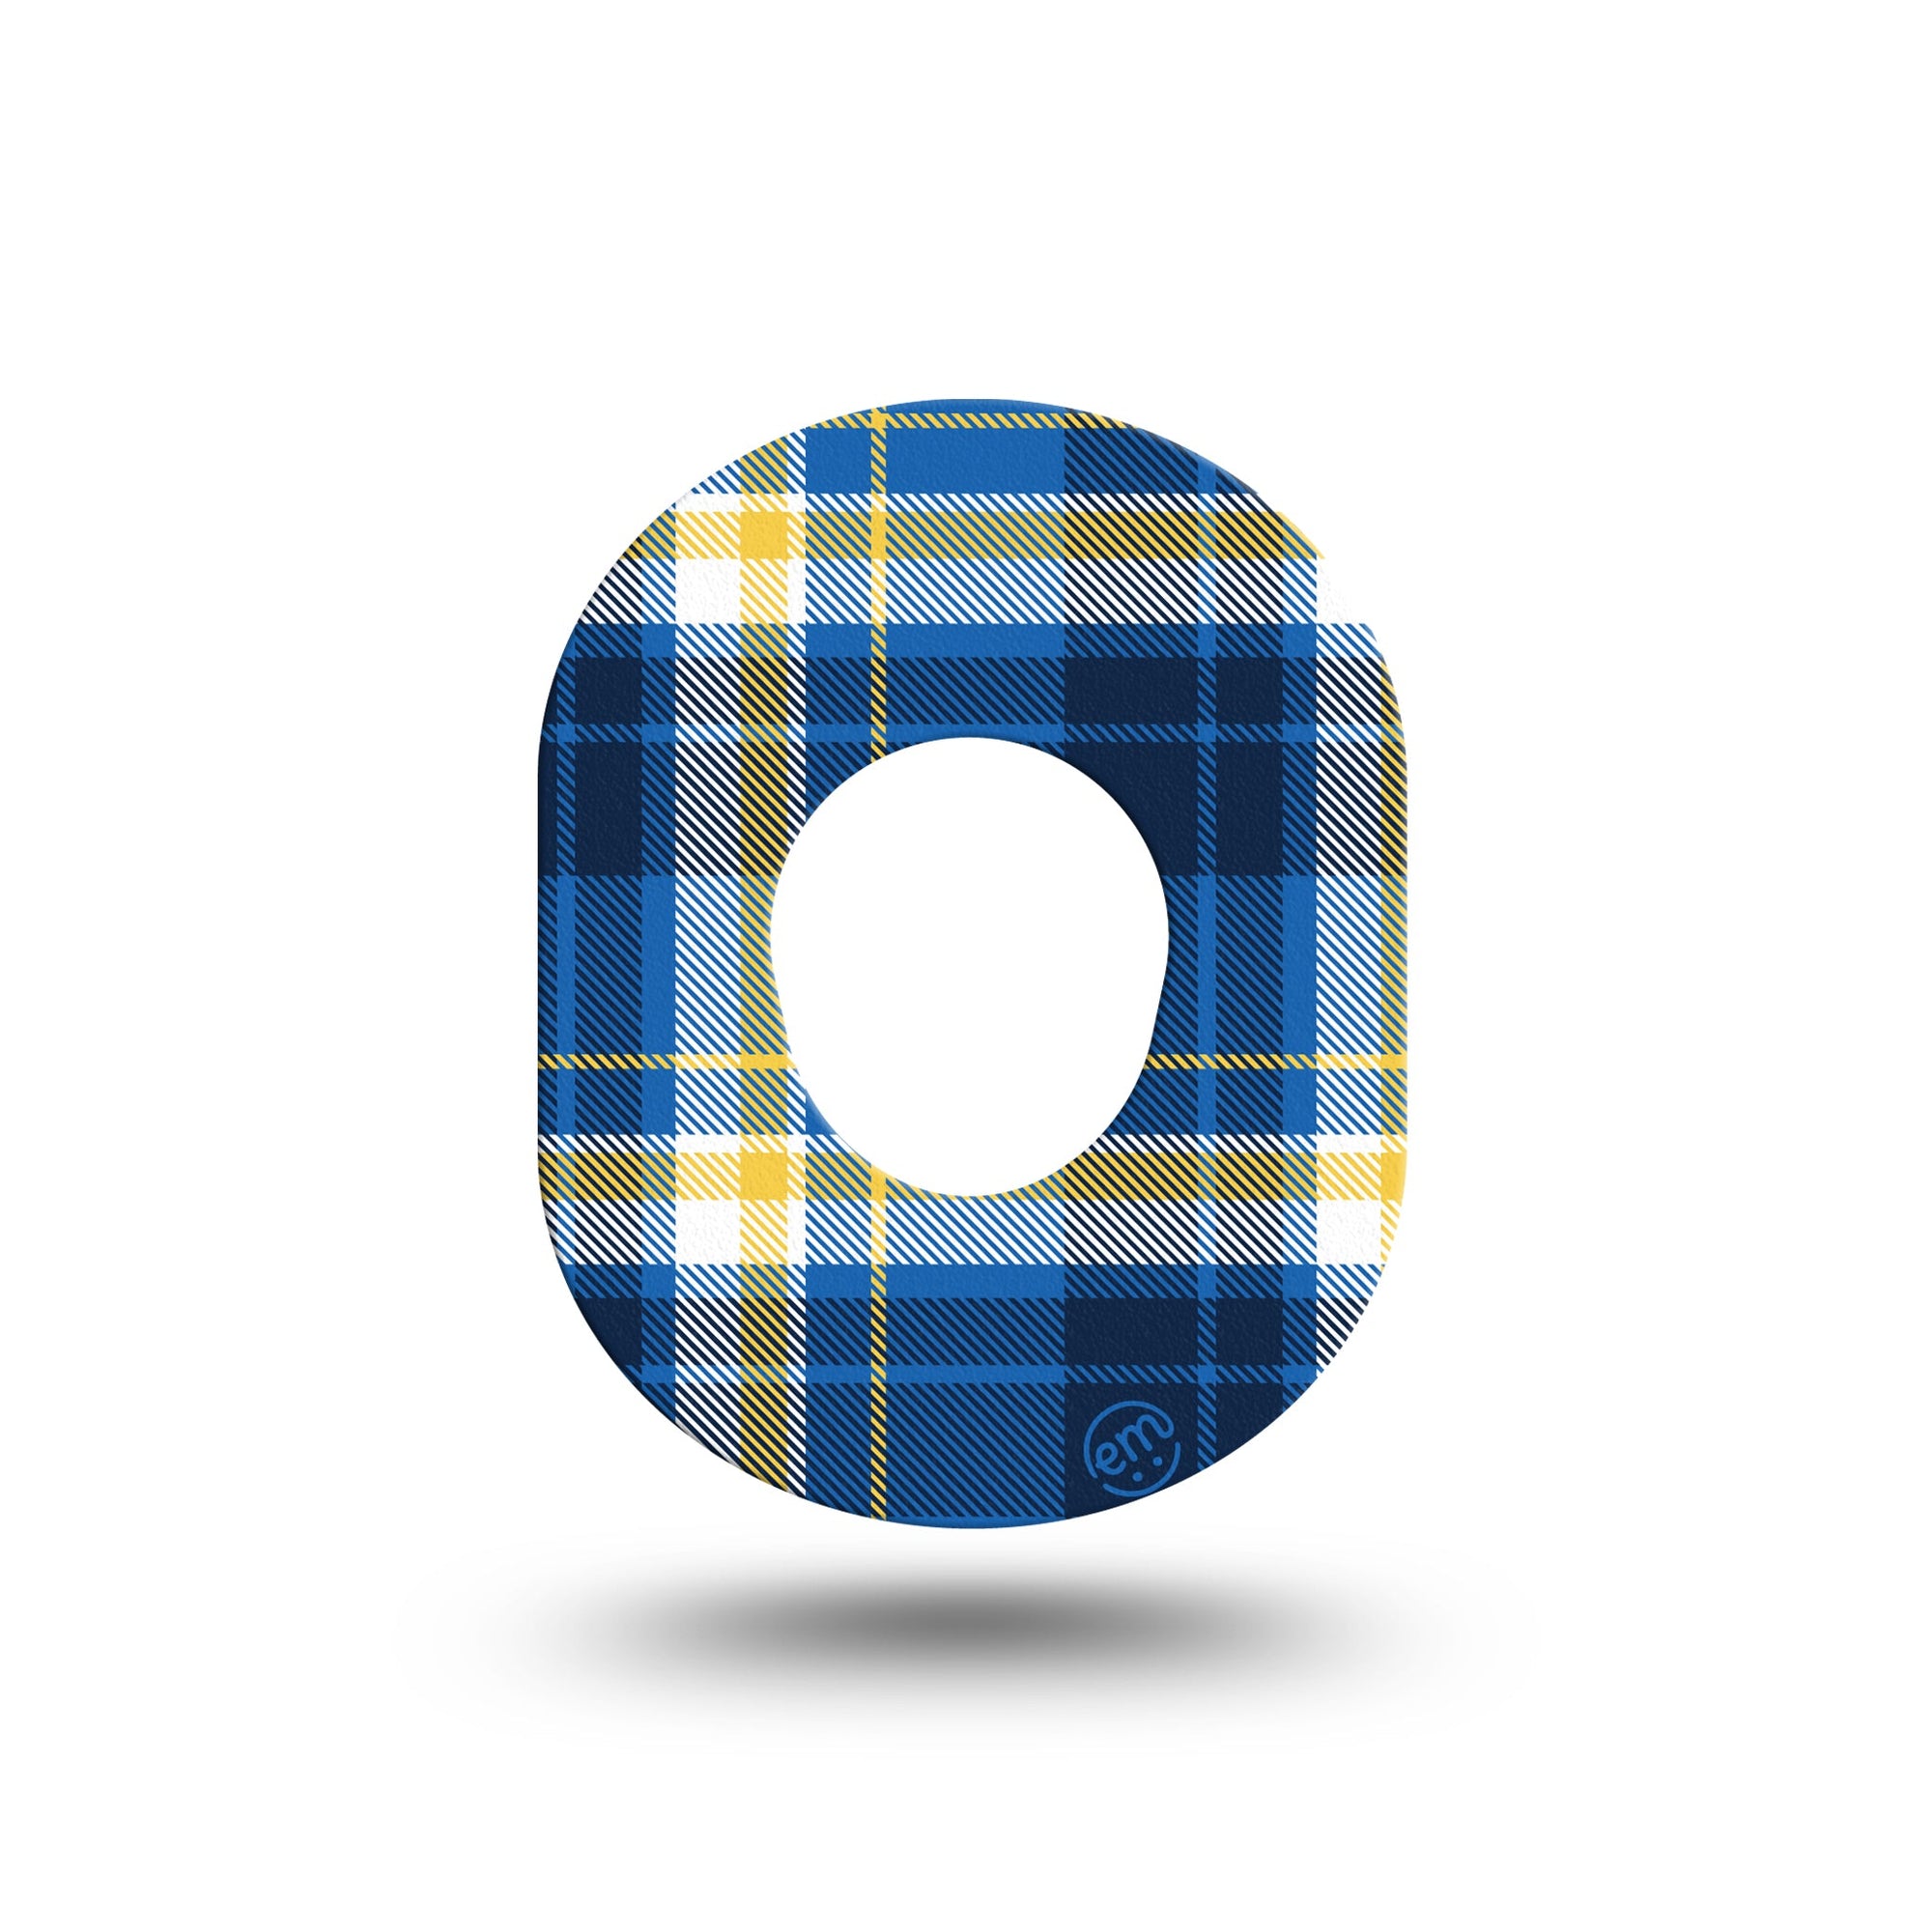 ExpressionMed Blue Plaid Dexcom G7 Mini Tape, Blue and Yellow Plaid, CGM Overlay Patch Design